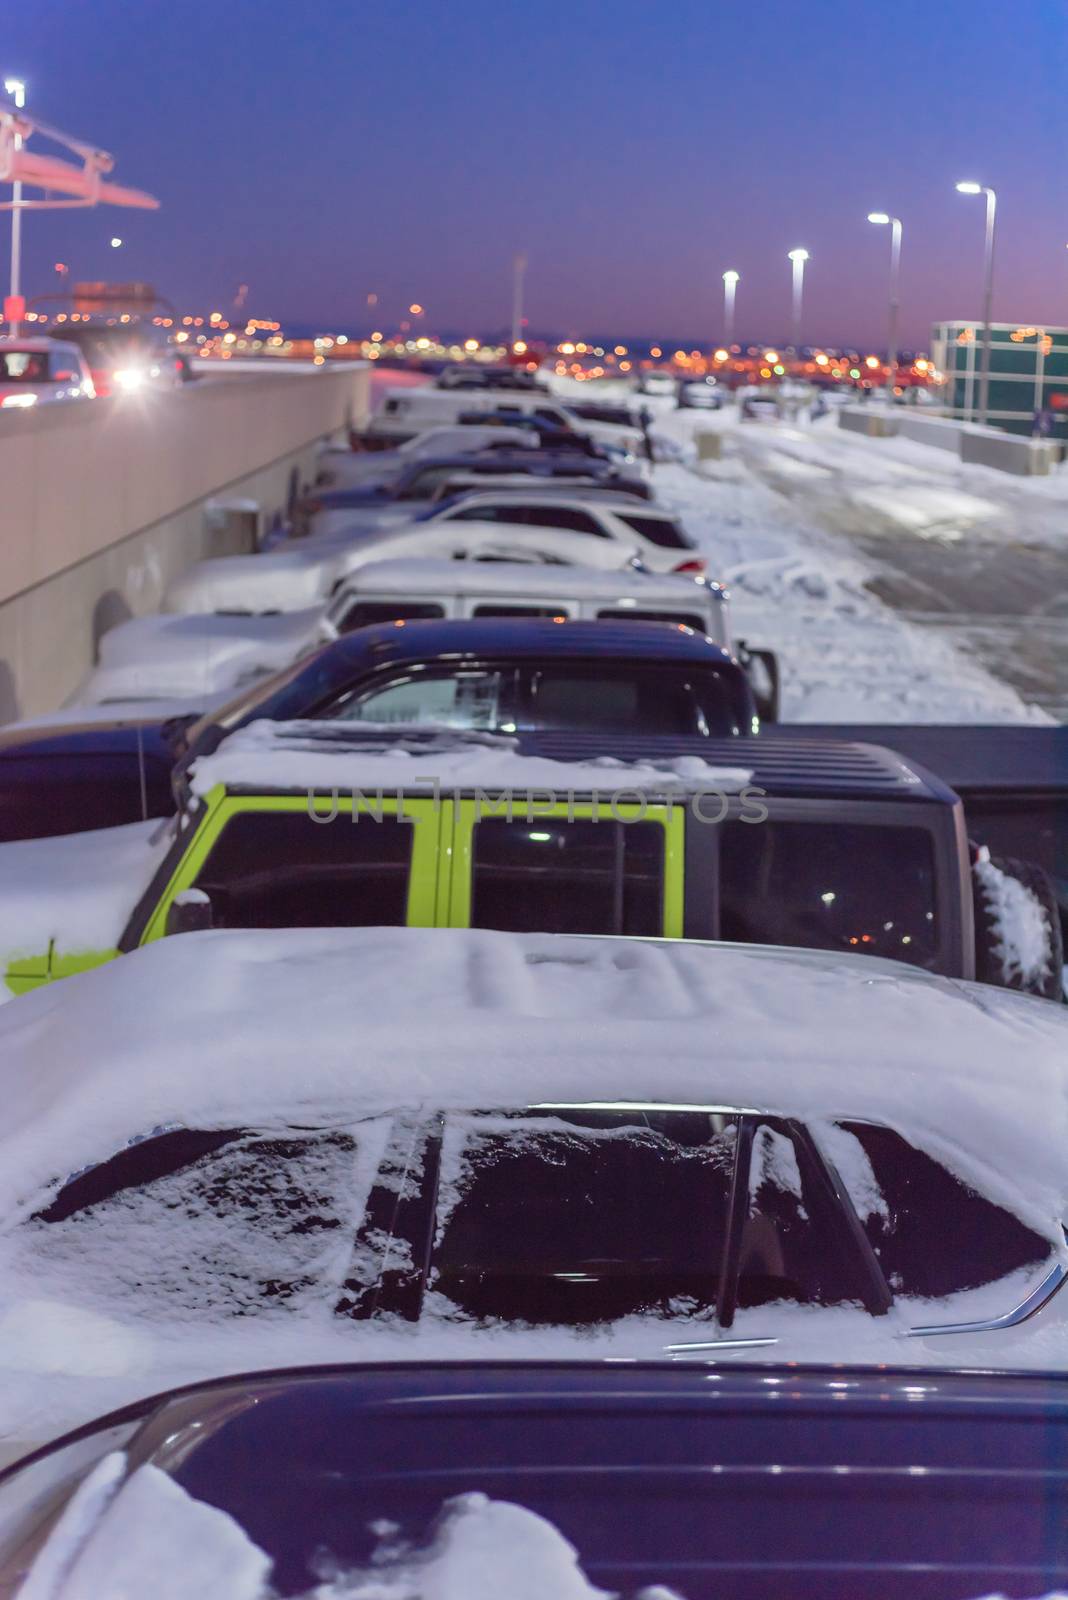 View from above row of cars at busy lot with snowdrifts during severe weather condition in Colorado, USA. Full terminal parking at Denver International Airport (DIA) in frosty cold autumn sunset